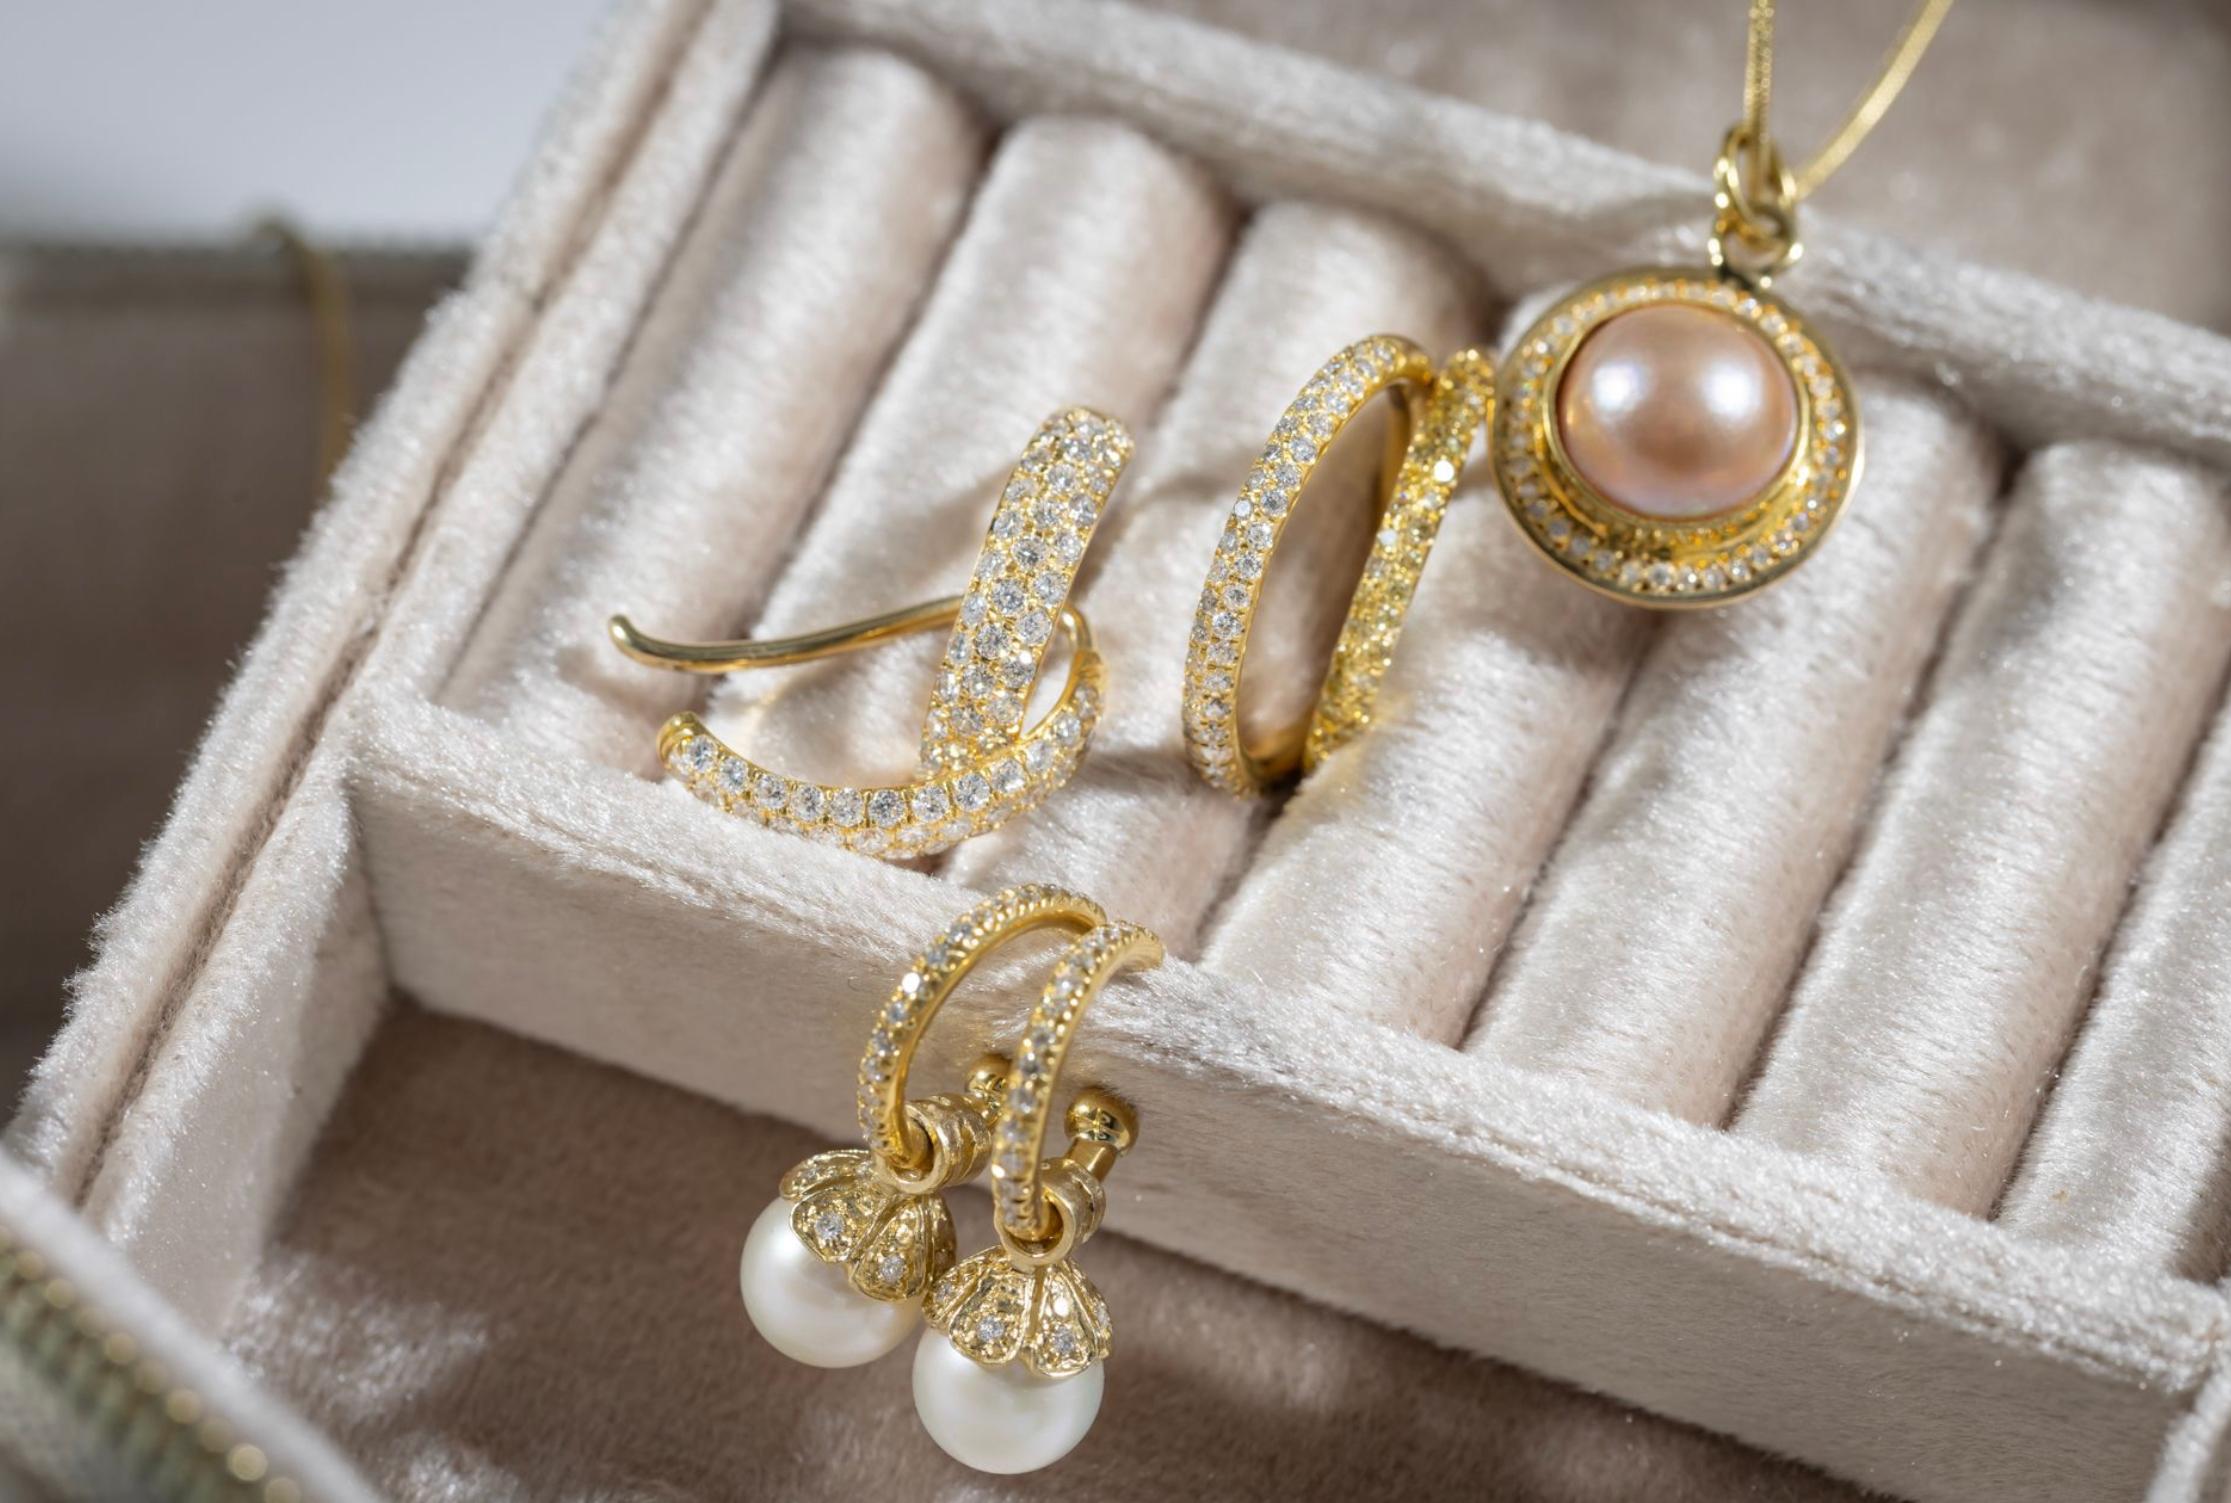 Paris & Lily, 22k Gold, Diamond Hoop Earrings with Removable Pearl Pendants In New Condition For Sale In Montclair, NJ